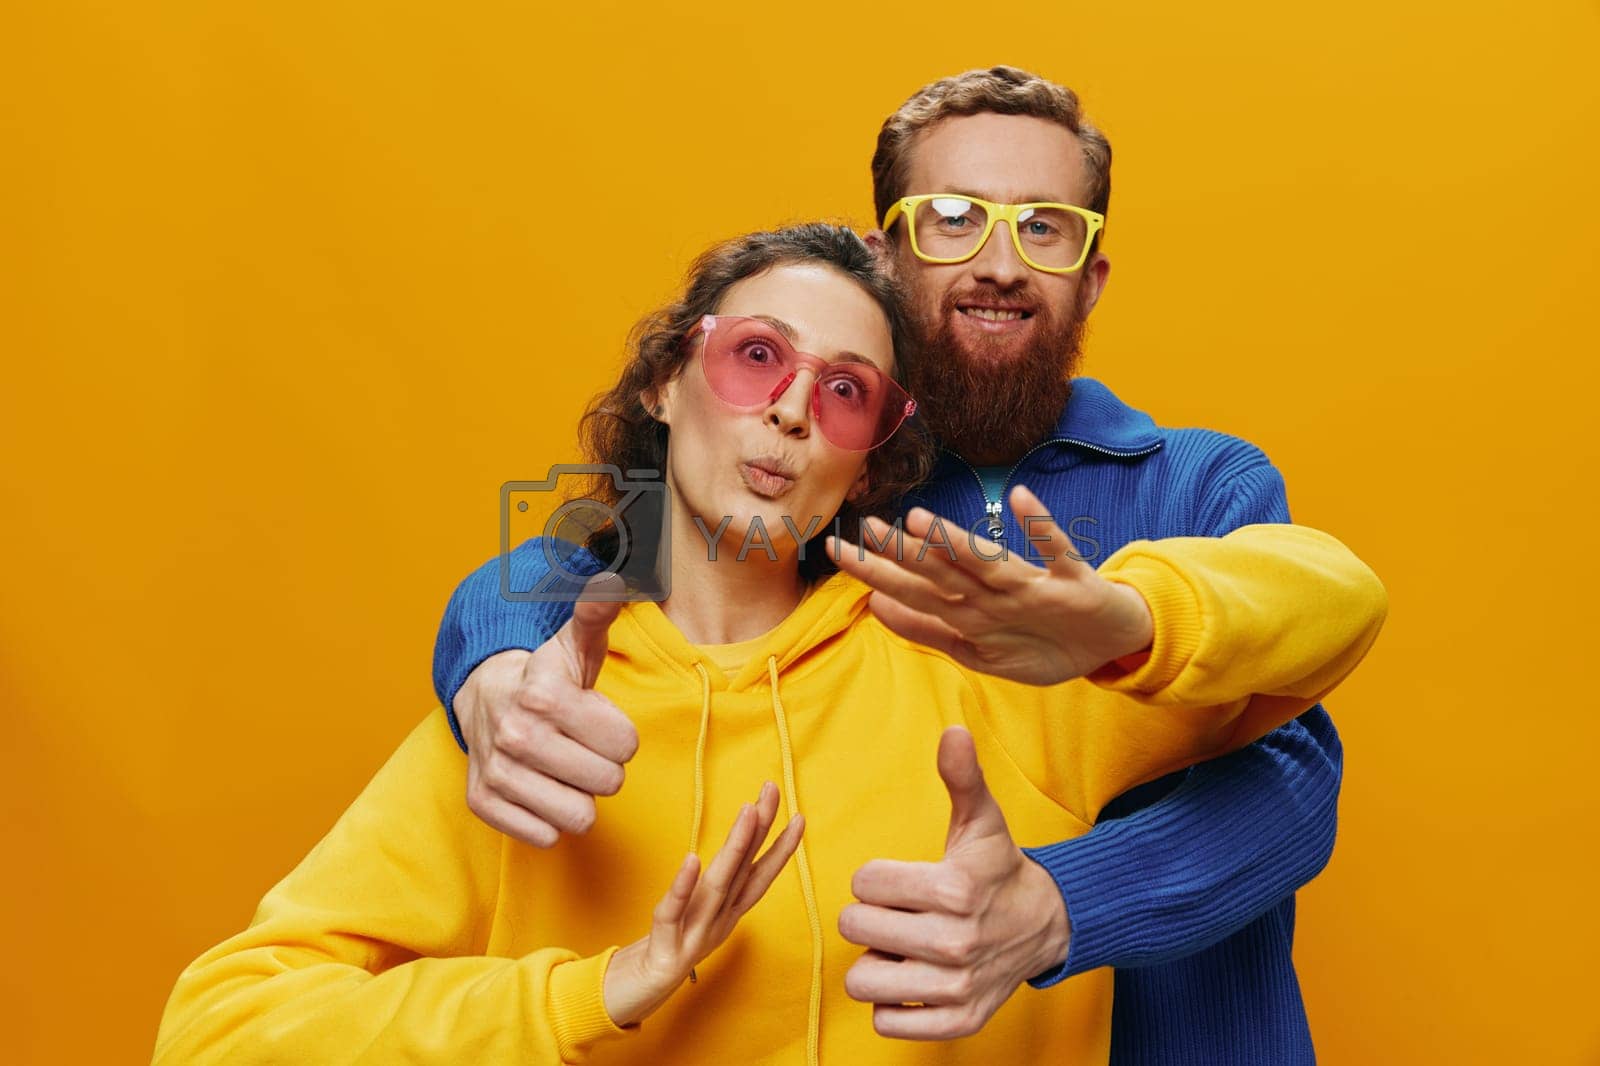 Royalty free image of Man and woman couple smiling cheerfully and crooked with glasses, on yellow background, symbols signs and hand gestures, family shoot, newlyweds. by SHOTPRIME